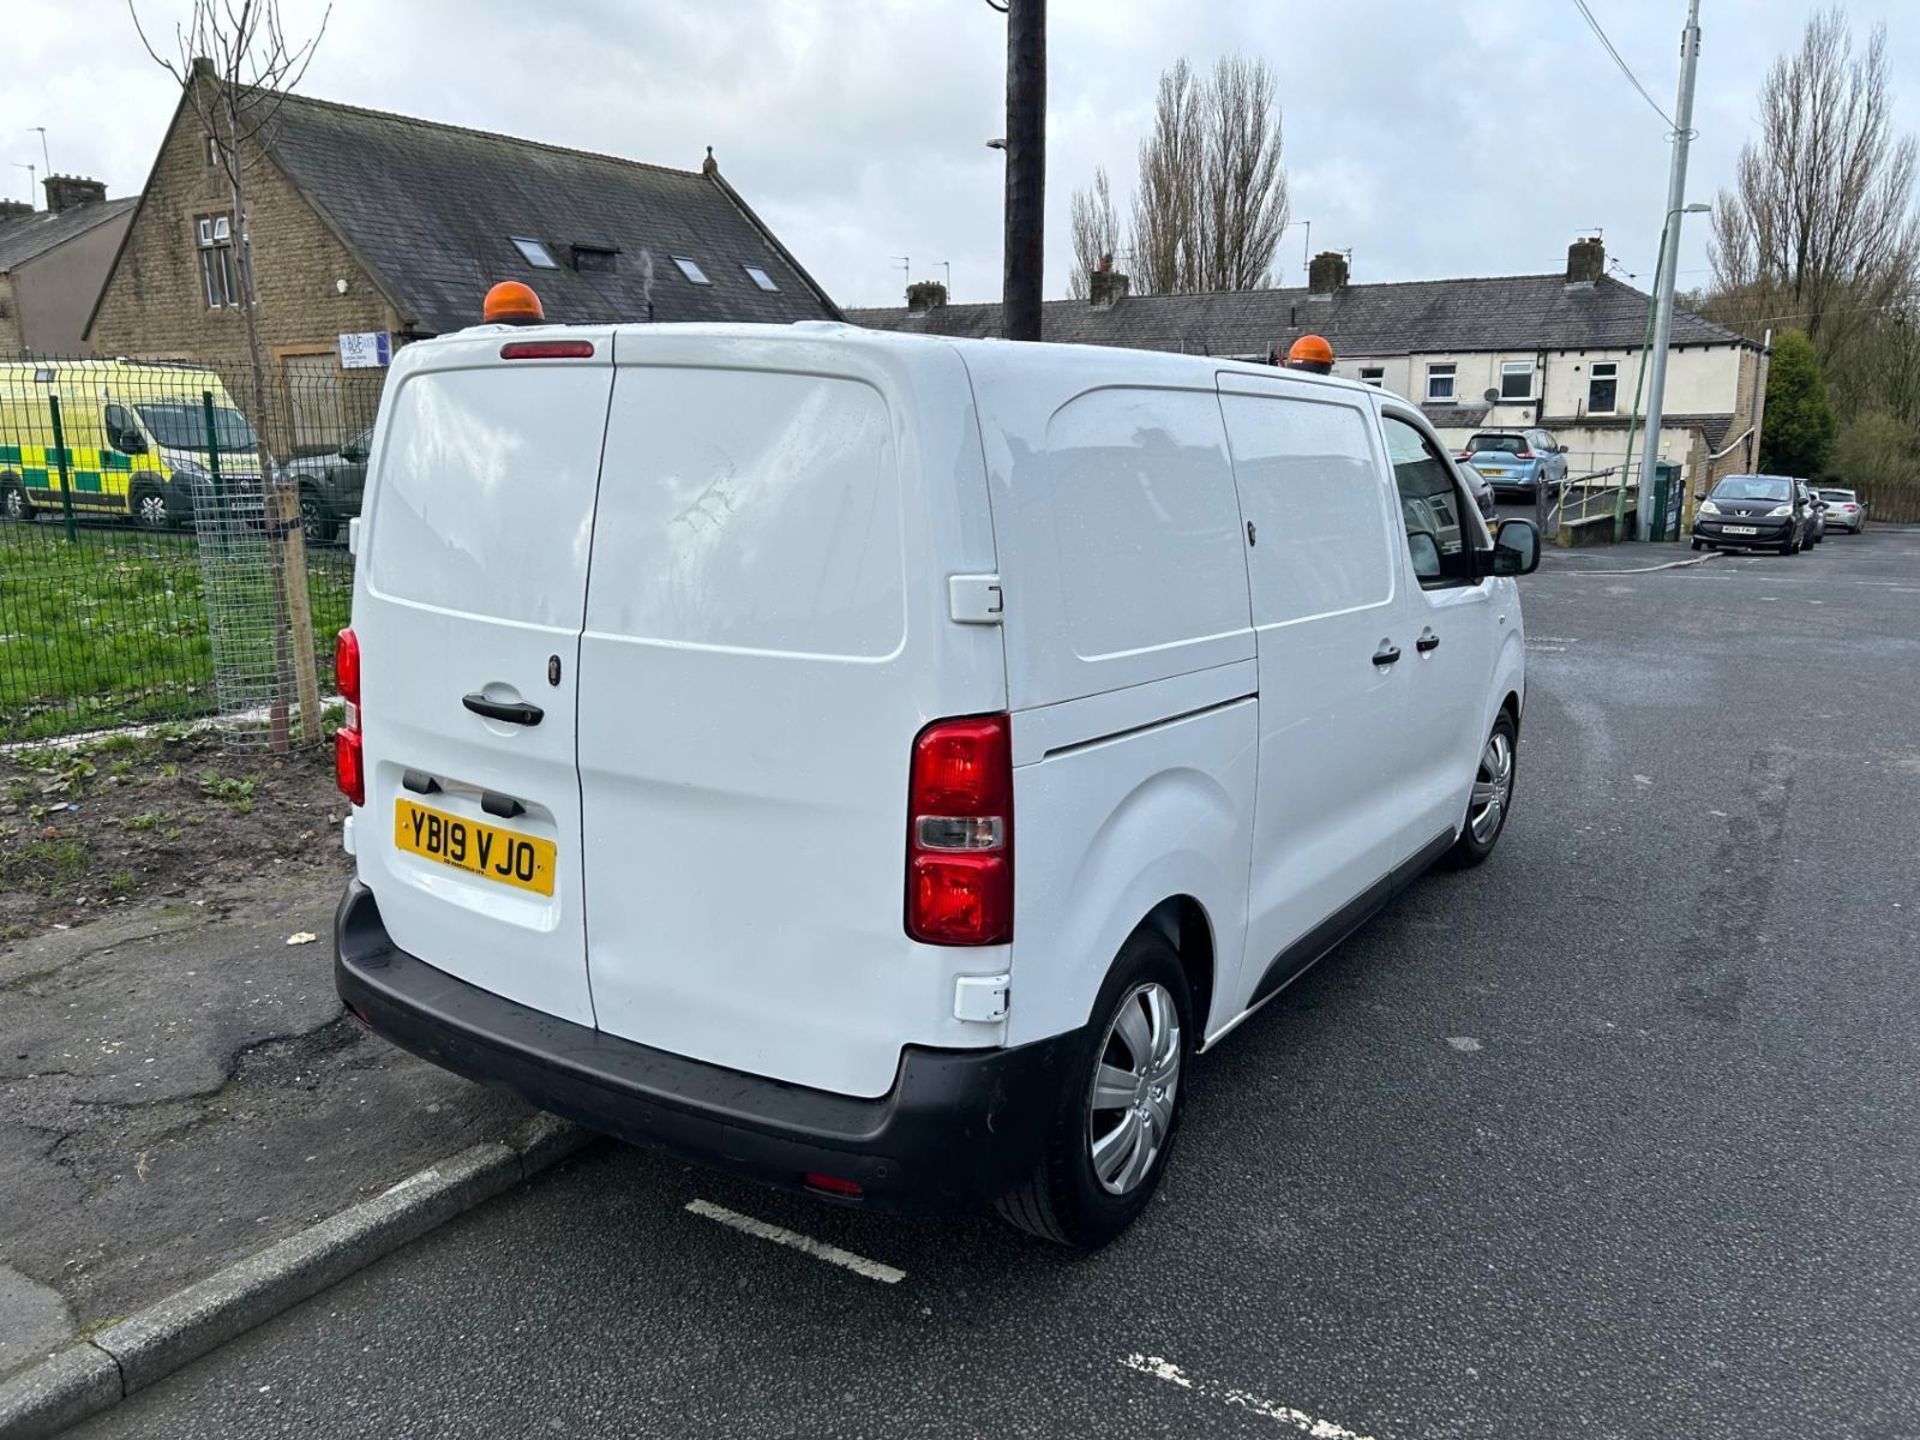 2019 CITROEN DISPATCH - 124K MILES - HPI CLEAR - READY TO GO ! - Image 9 of 12